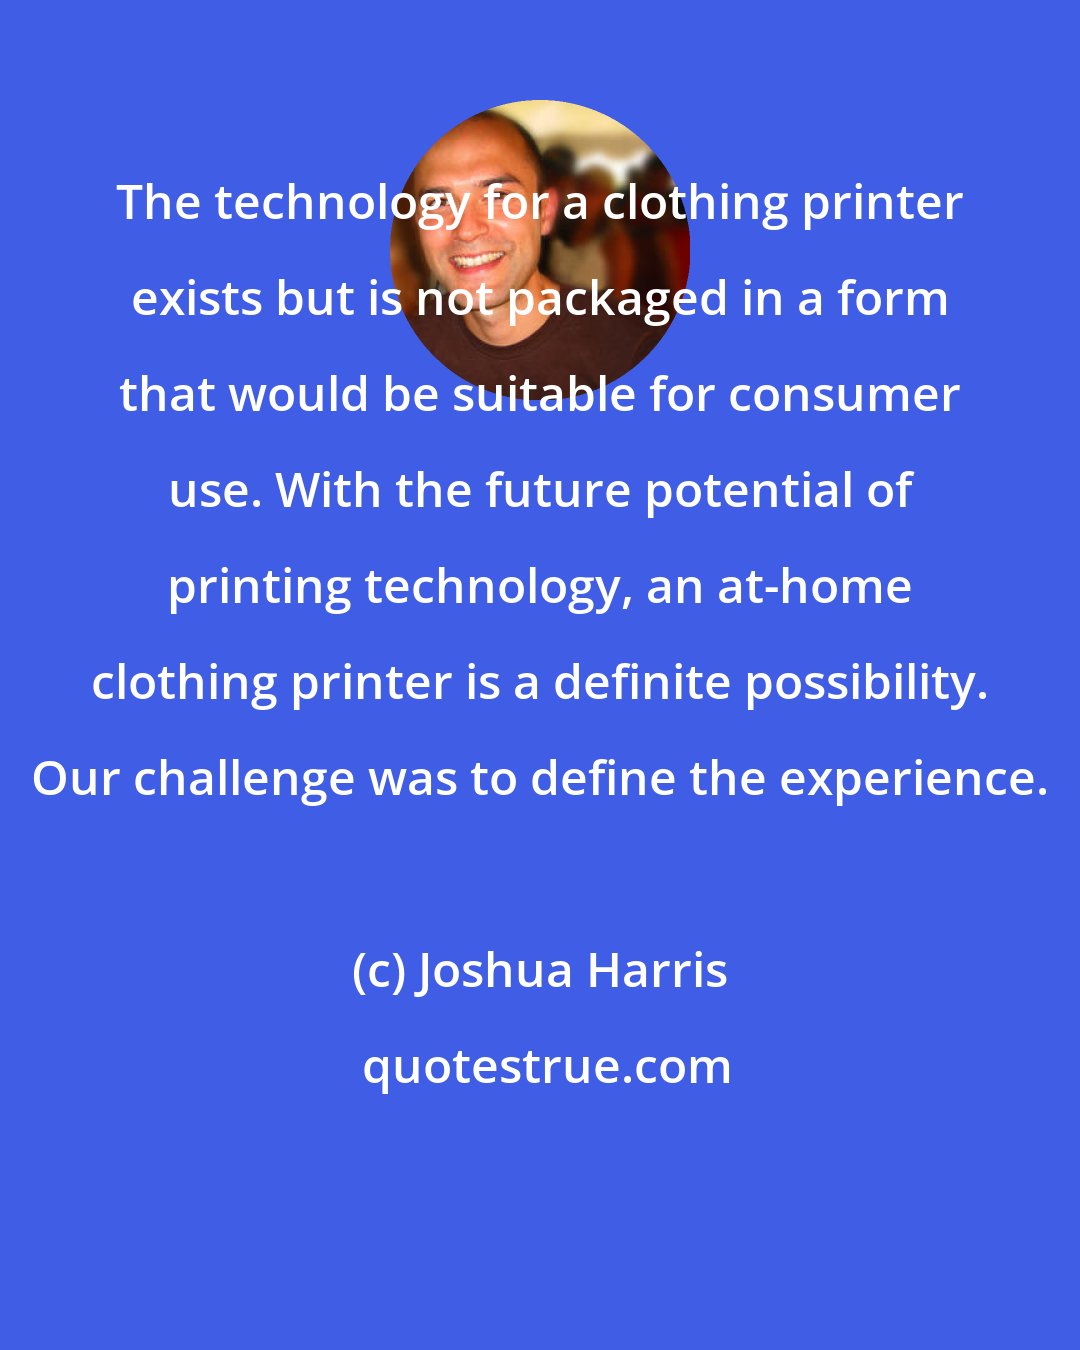 Joshua Harris: The technology for a clothing printer exists but is not packaged in a form that would be suitable for consumer use. With the future potential of printing technology, an at-home clothing printer is a definite possibility. Our challenge was to define the experience.